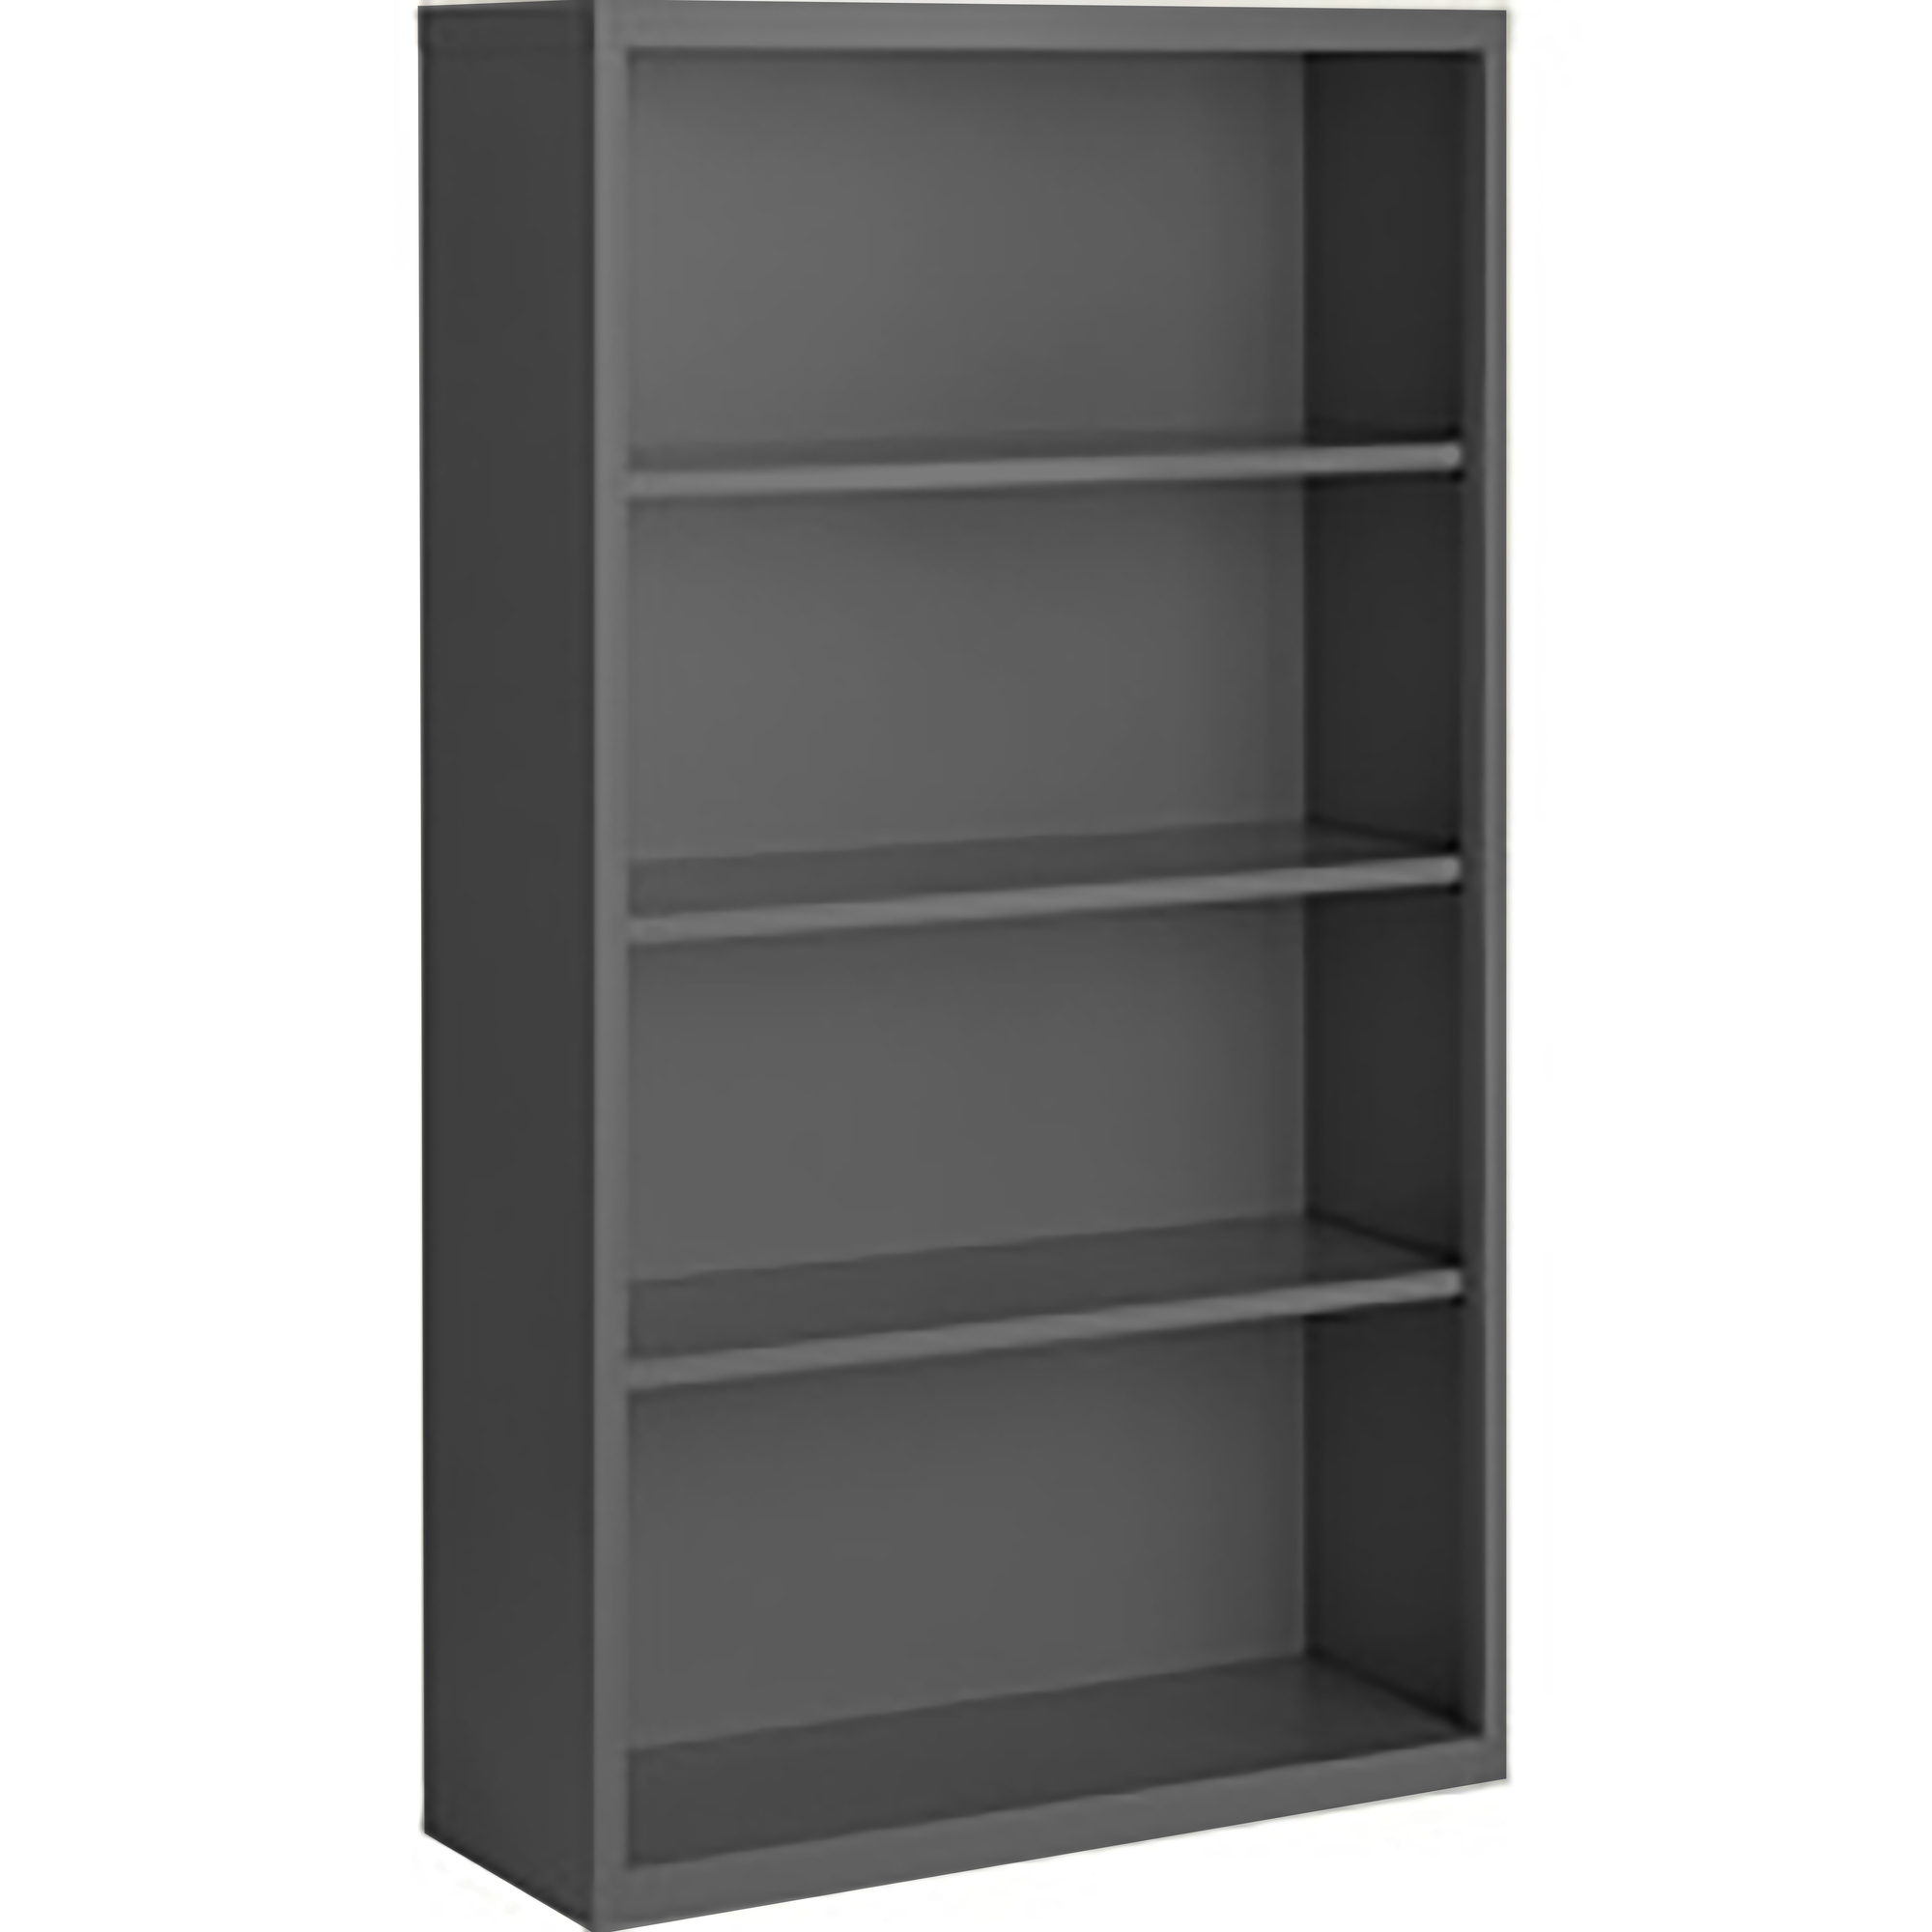 Steel Cabinets USA, 36Inchx13Inchx52Inch Charcoal Bookcase Steel Full Assembled, Height 52 in, Shelves (qty.) 4, Material Steel, Model BCA-365213-C